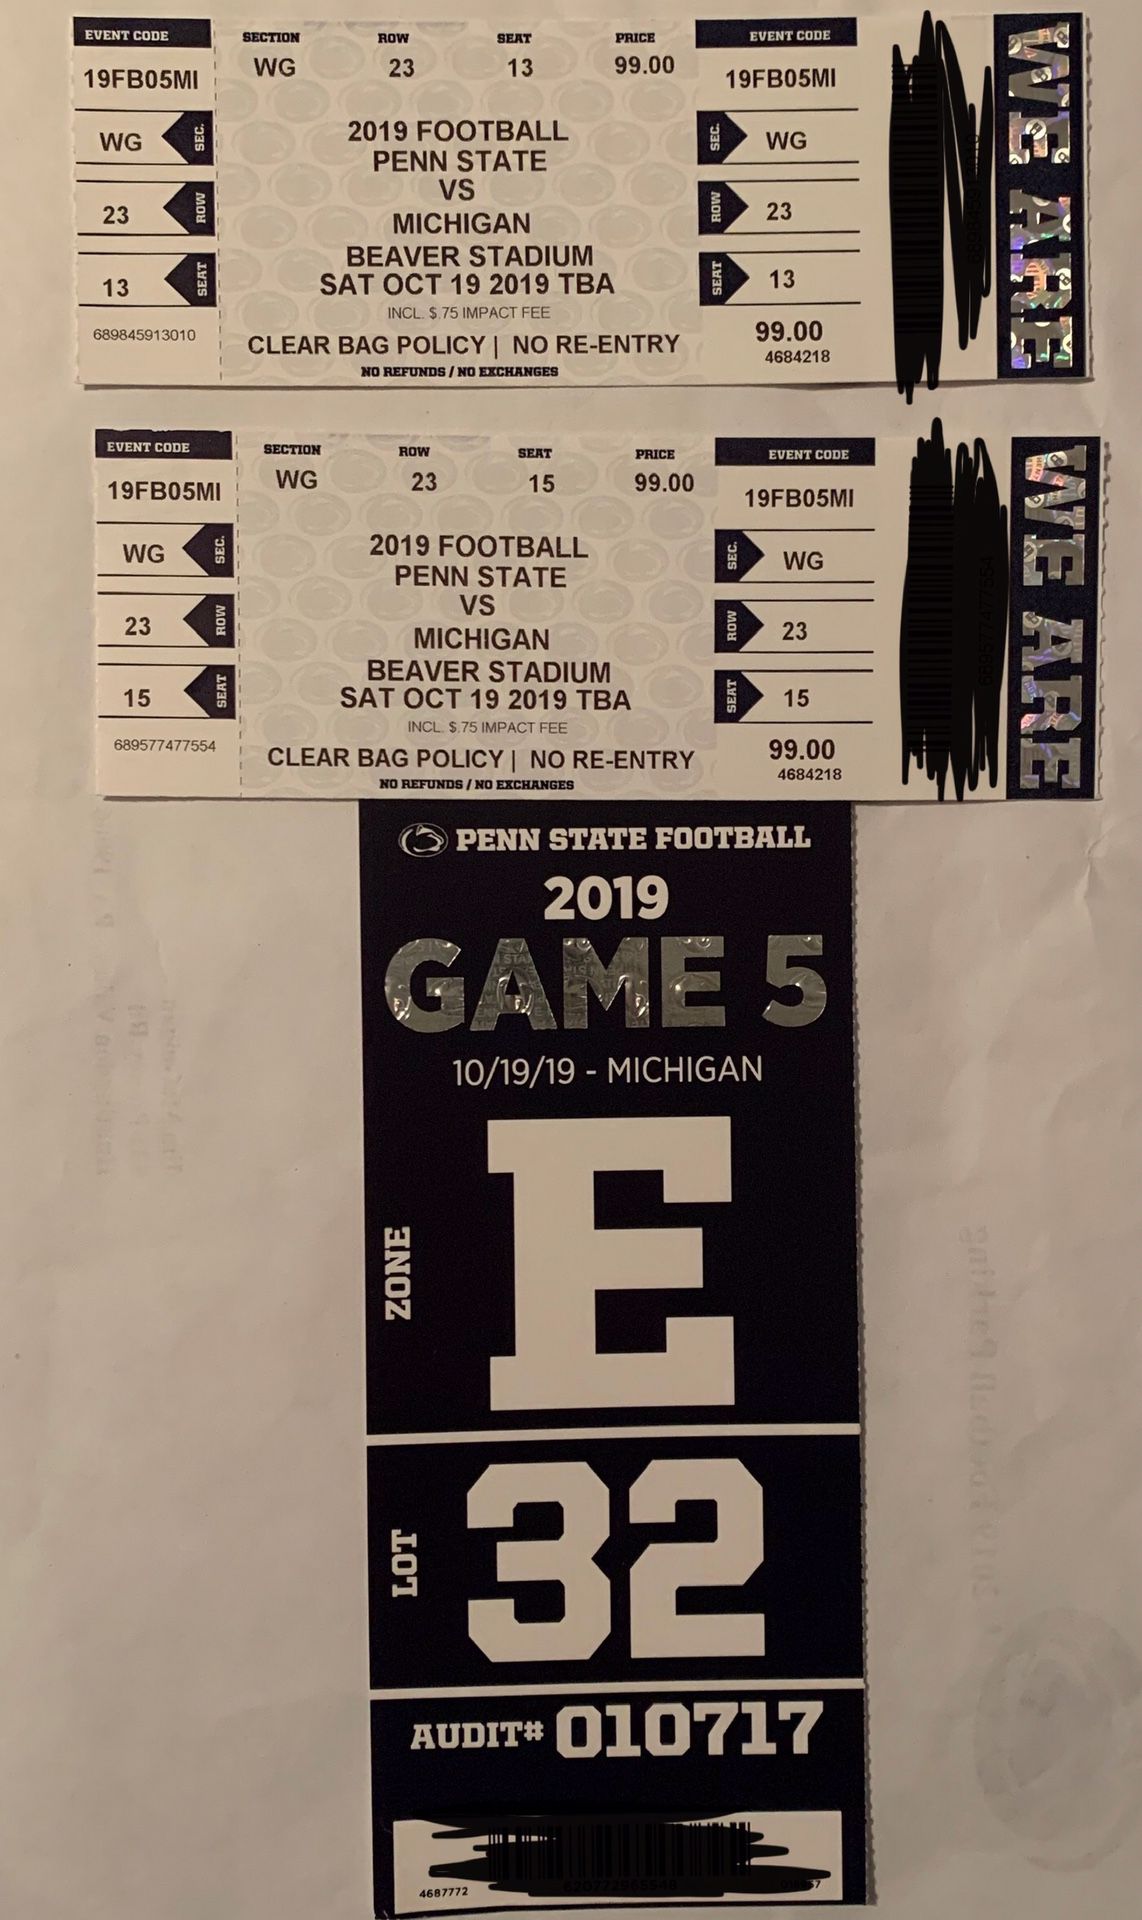 2 PSU vs Michigan with parking for this Saturday